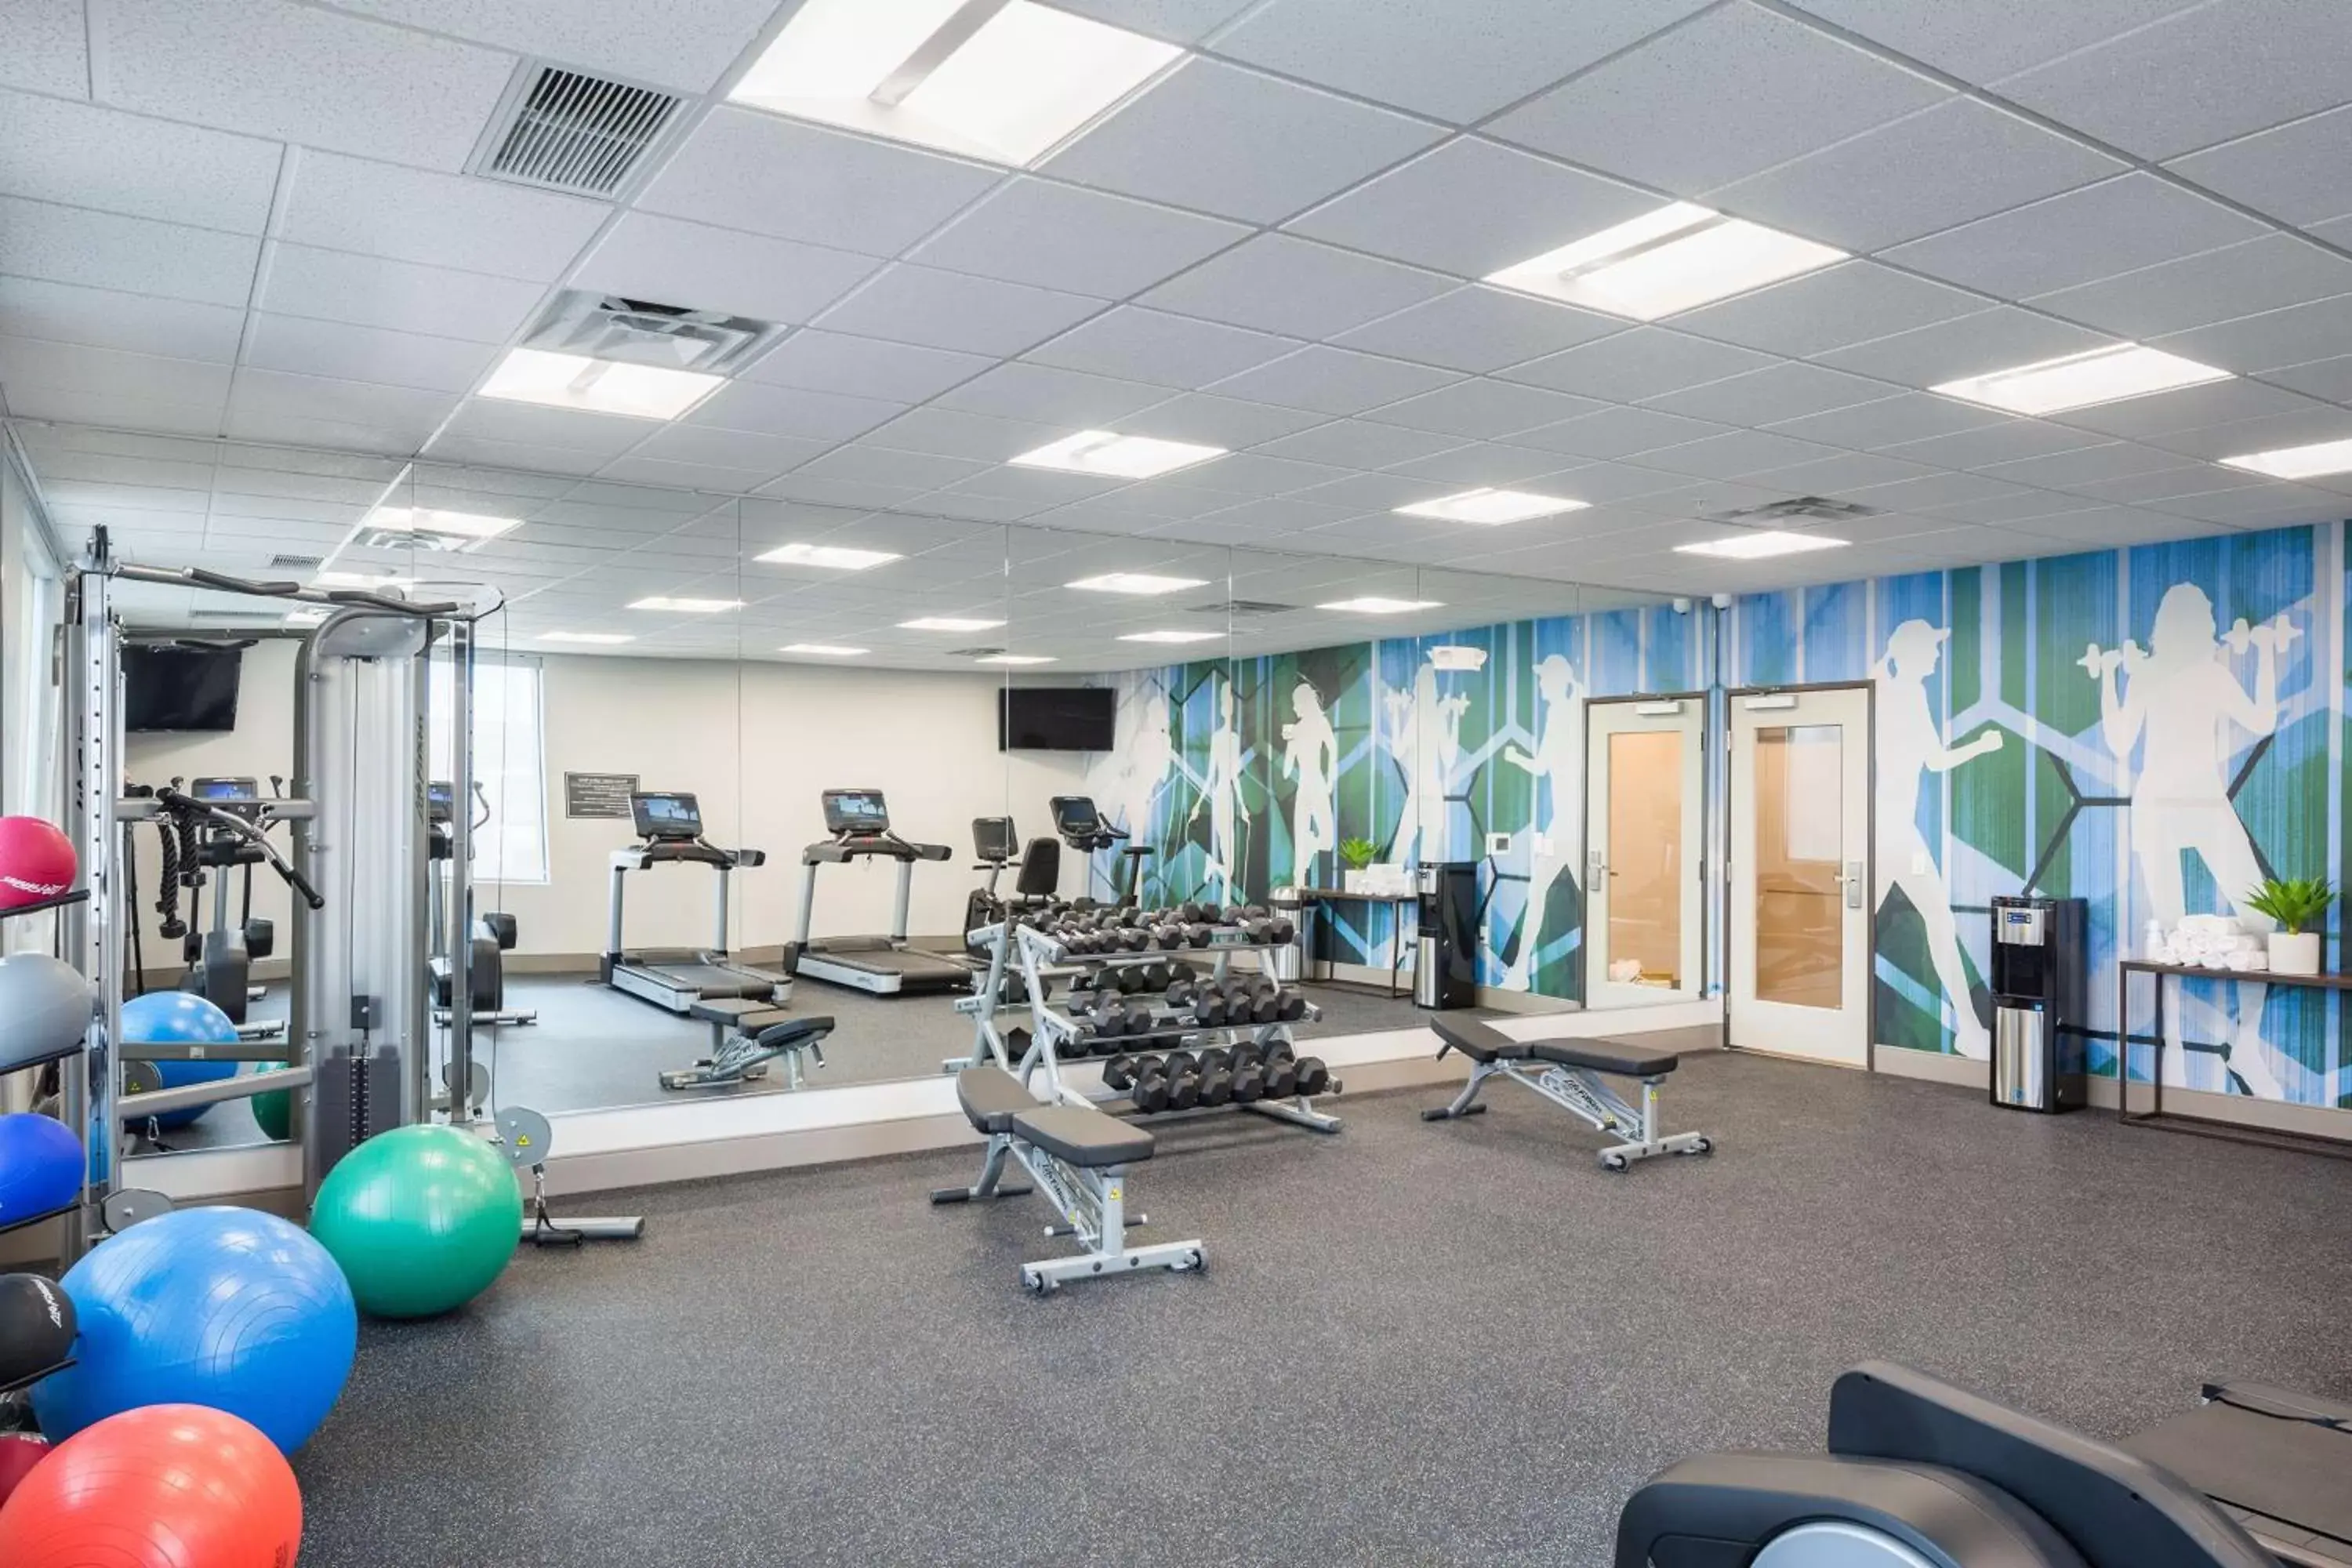 Fitness centre/facilities, Fitness Center/Facilities in Best Western Premier Hotel at Fisher's Landing